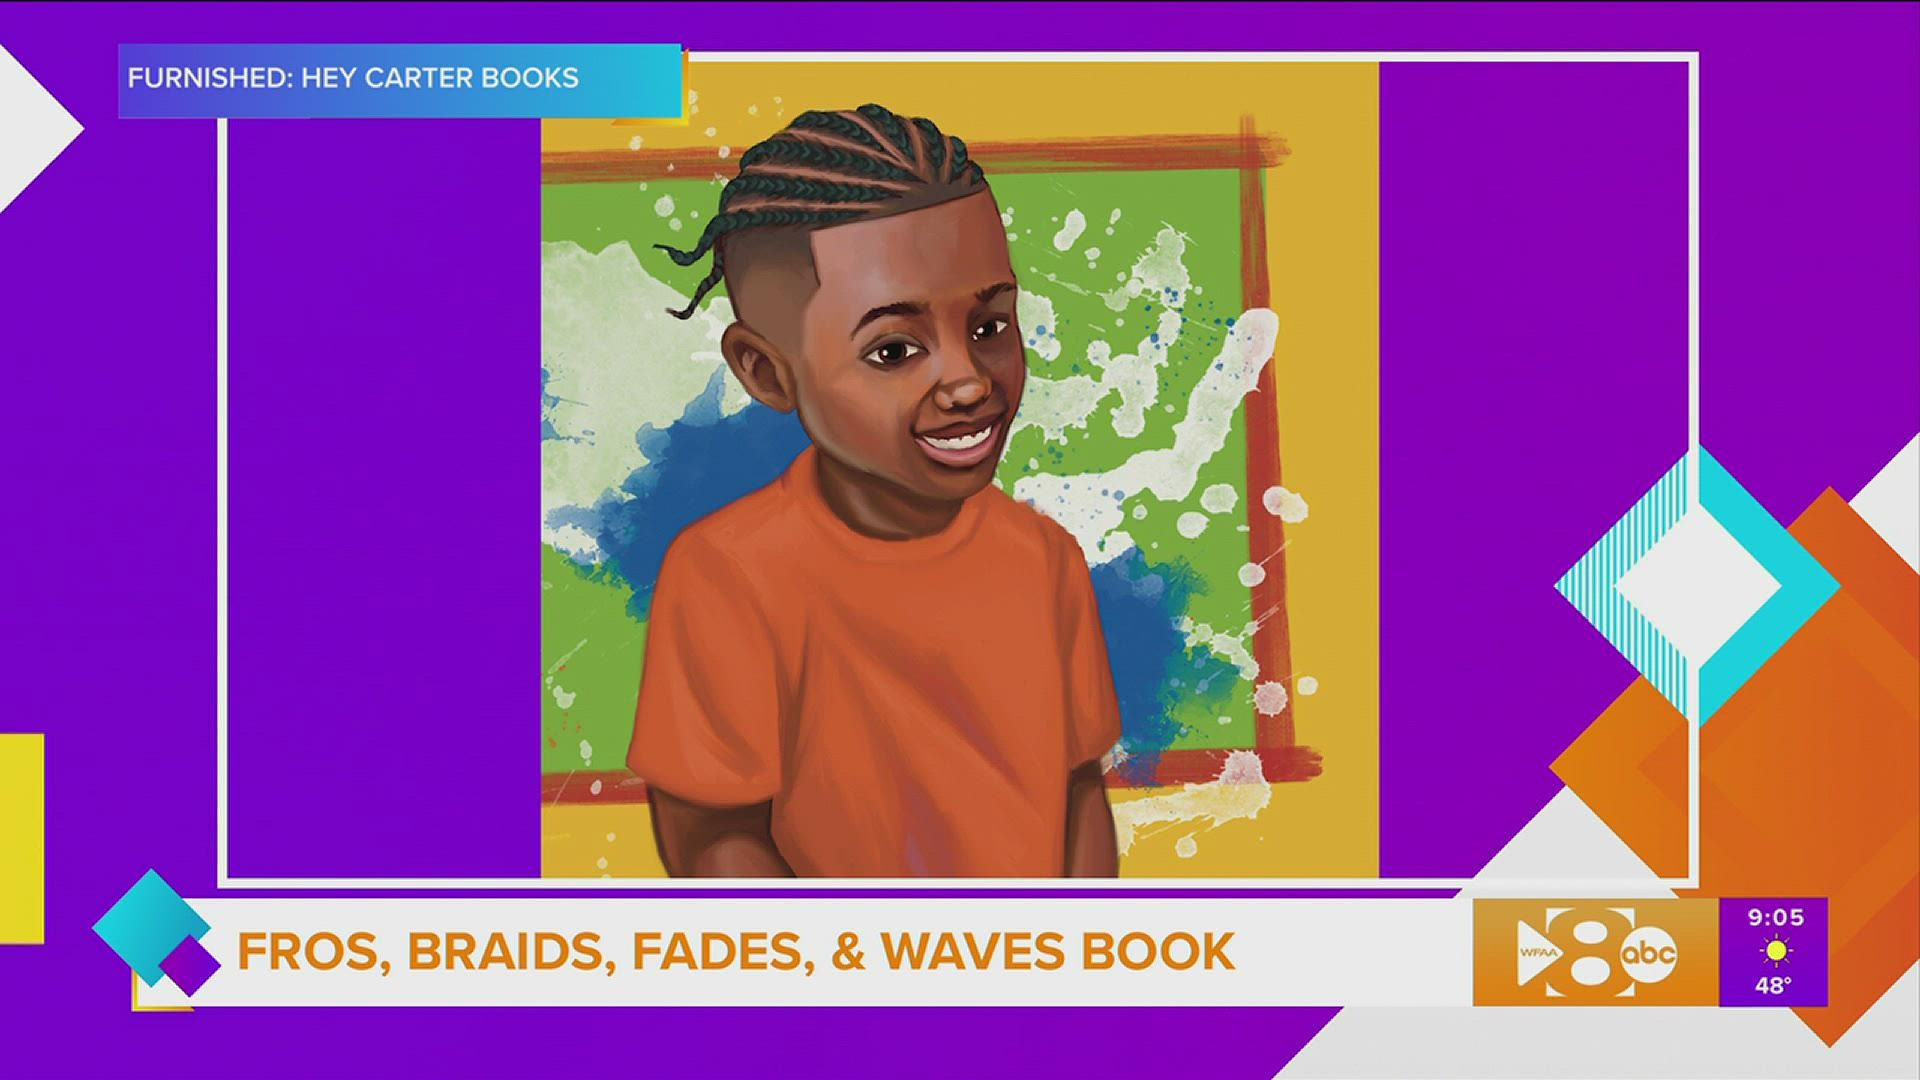 Doctor Thomishia Booker’s new book ‘Fros, Braids, Fades and Waves’ celebrates black hairstyles and aims to elevate Black boy joy.